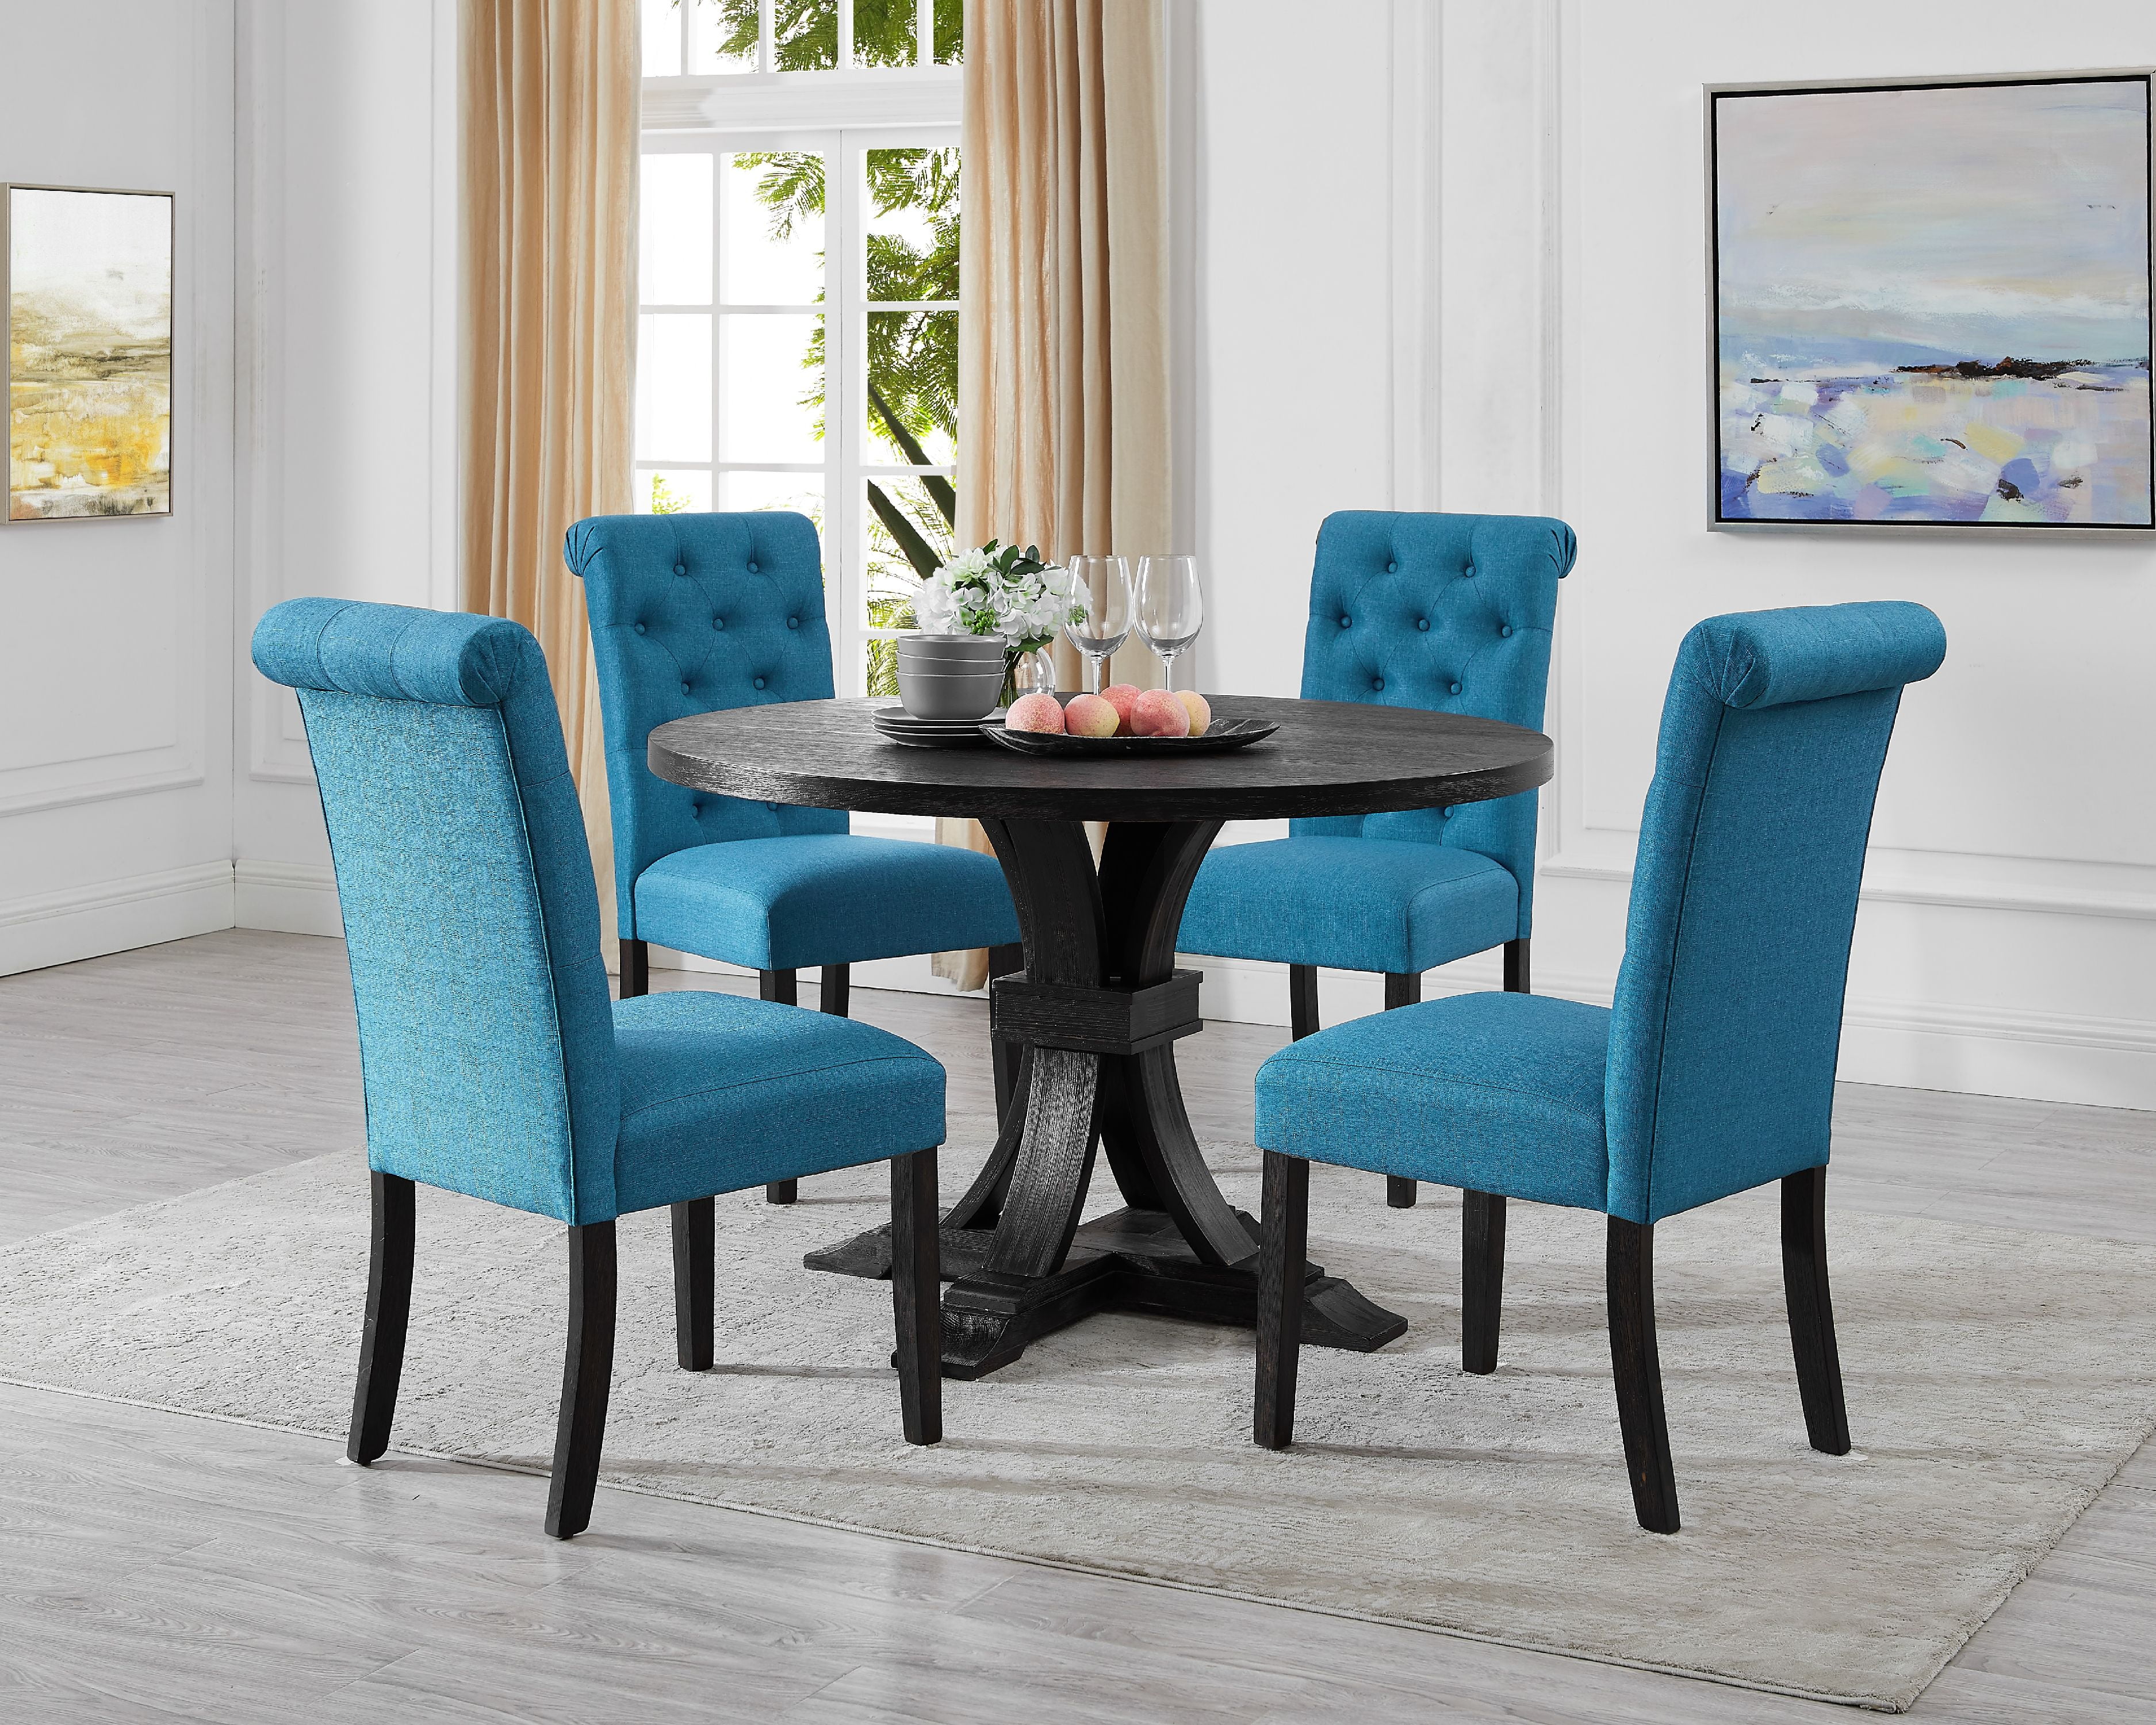 Dining Room Table With Padded Chairs